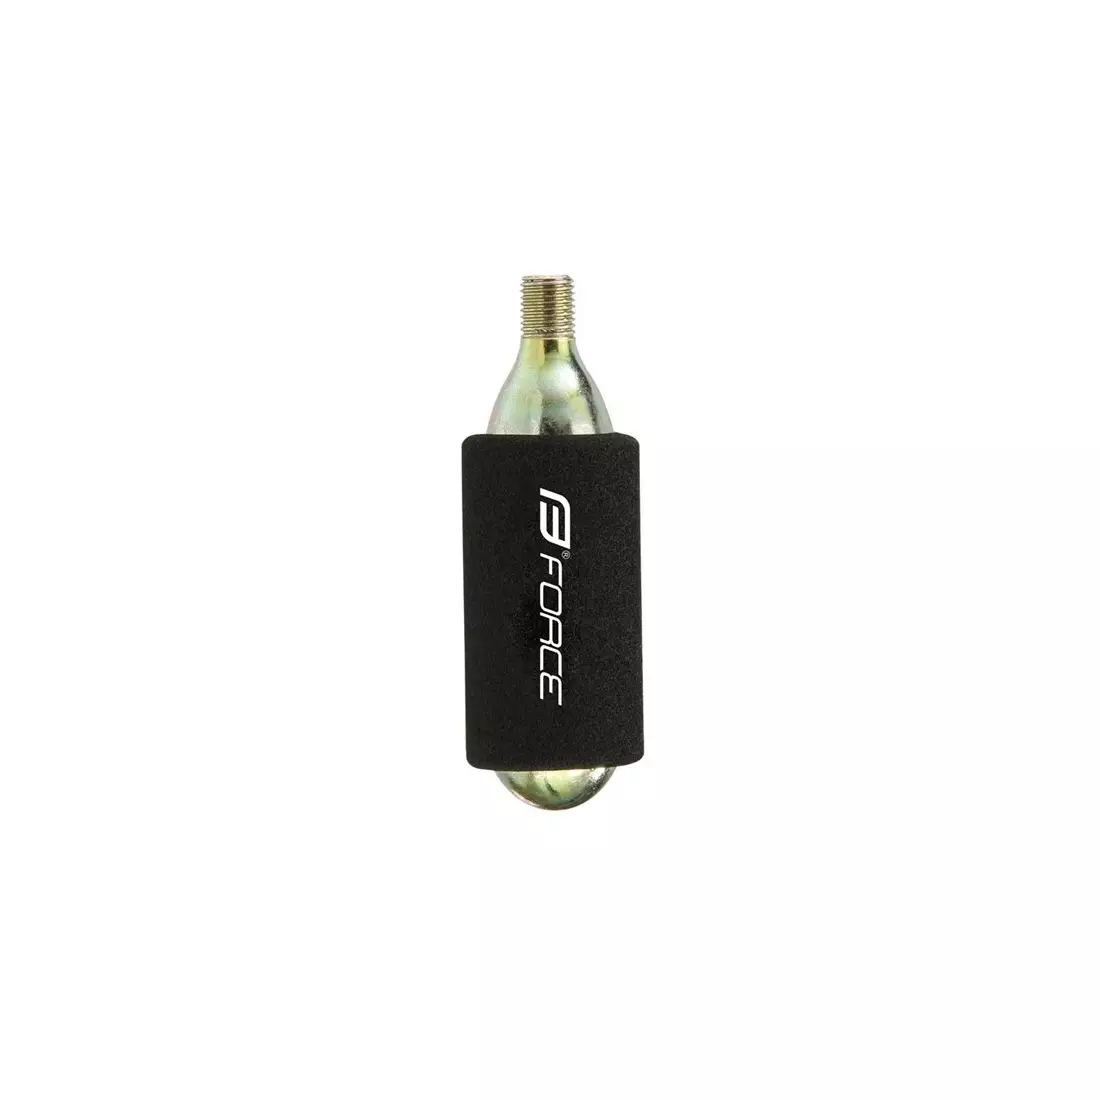 FORCE 75109 CO2 cartridge for FORCE bicycle pumps 16 g